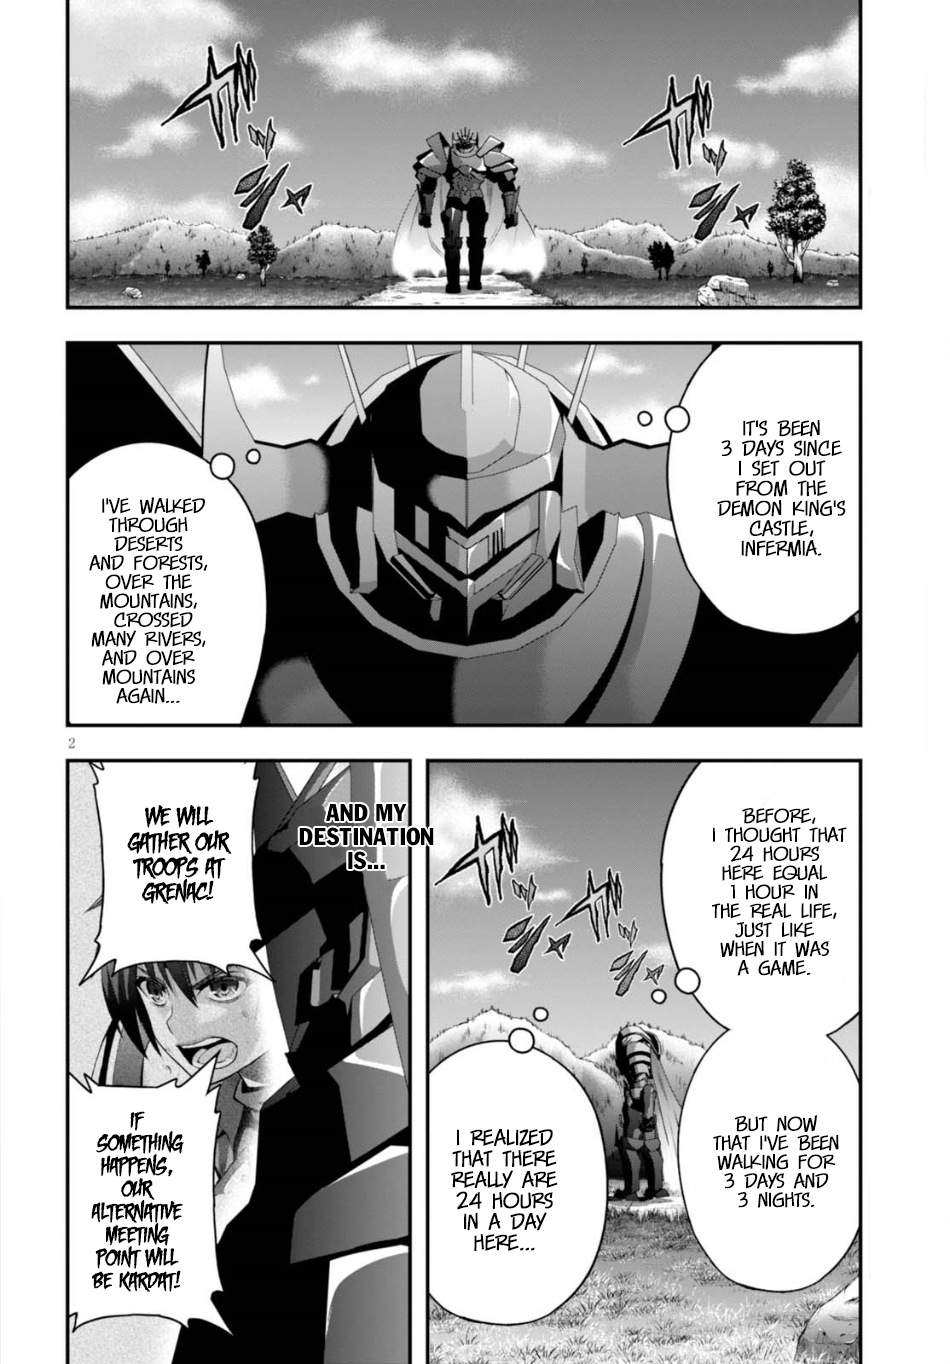 Ecstas Online Ch. 8 Even in the Game, Our Hierarchy From the Real World Doesn...